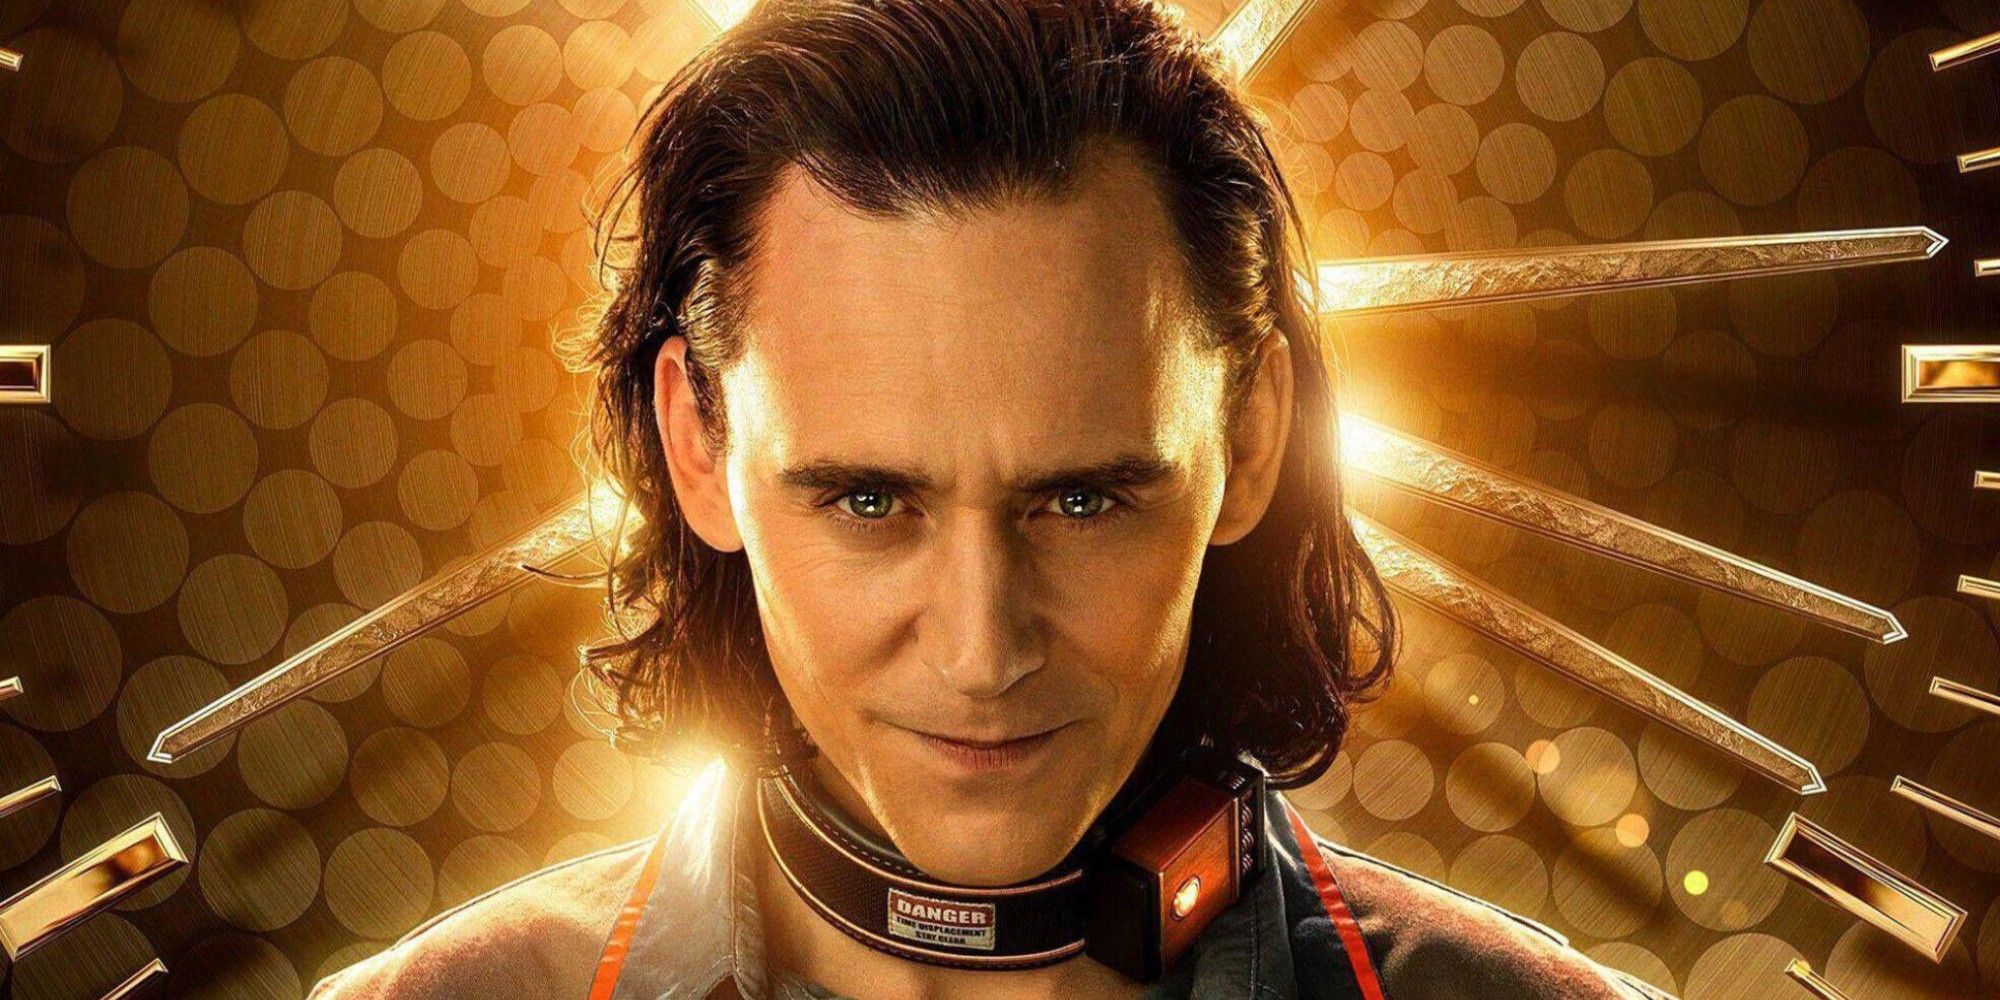 Close-up of Loki in a promo image for the Loki TV series.